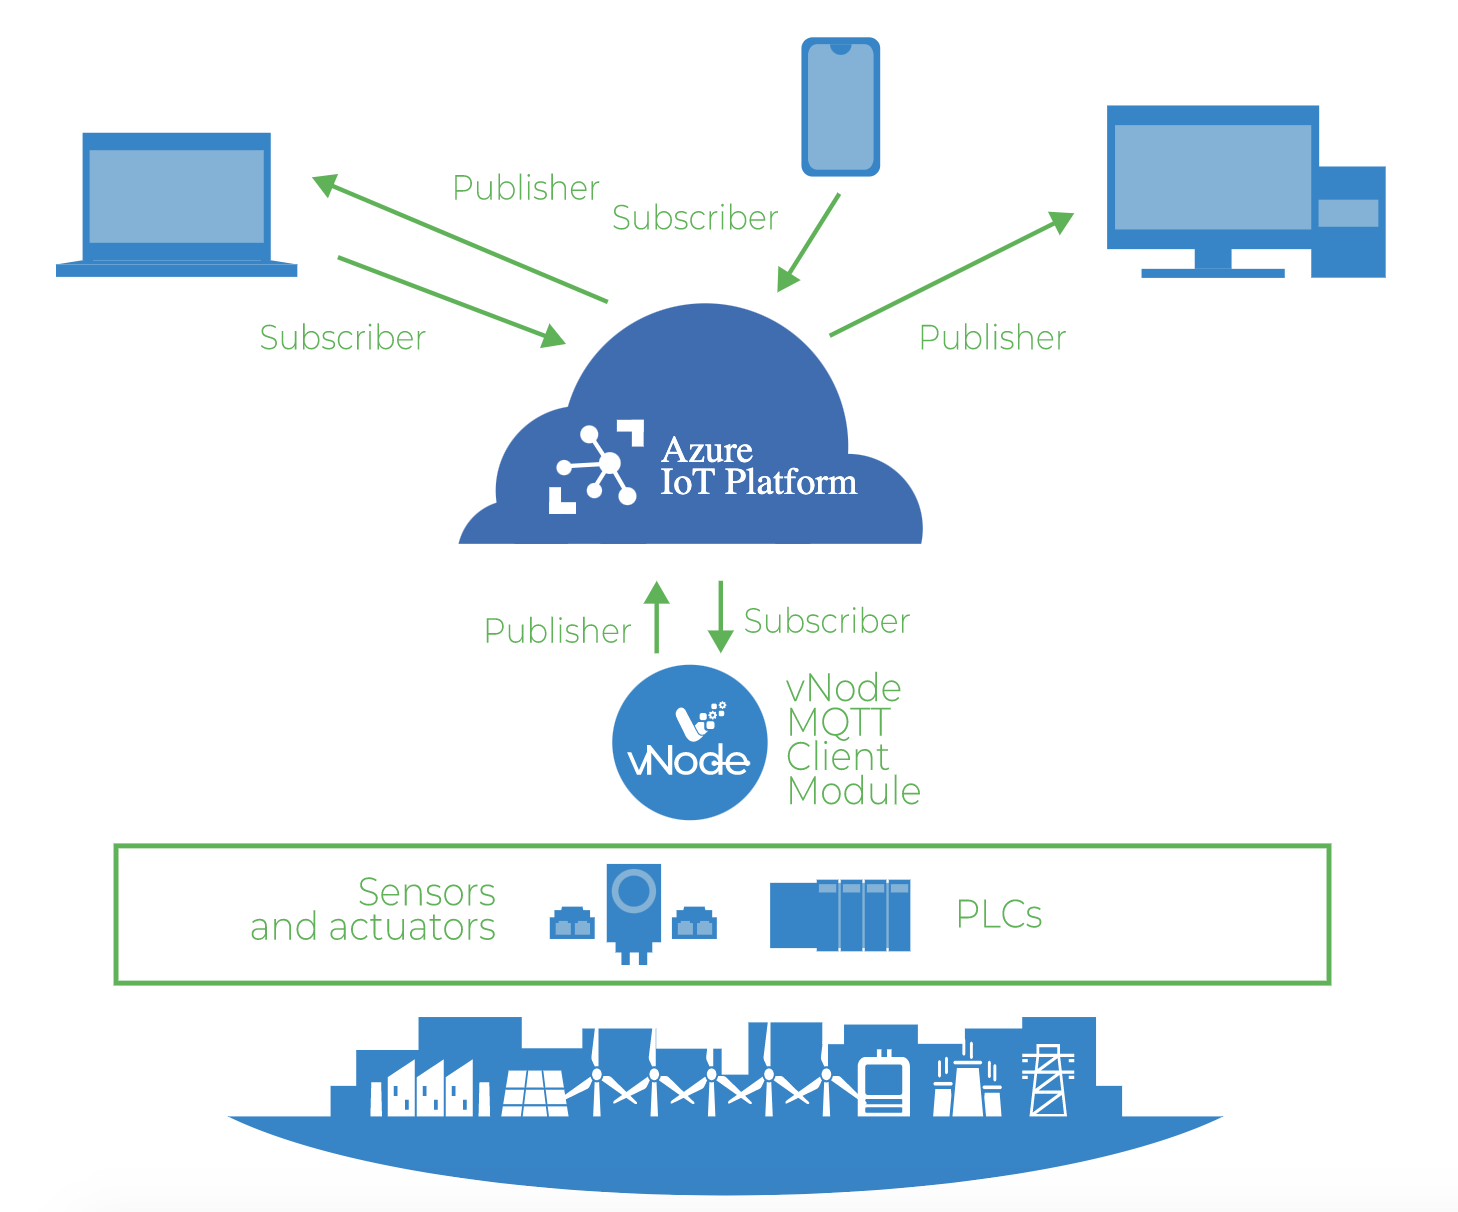 Connect your plant's PLCs or Control Devices to Microsoft Azure IoT